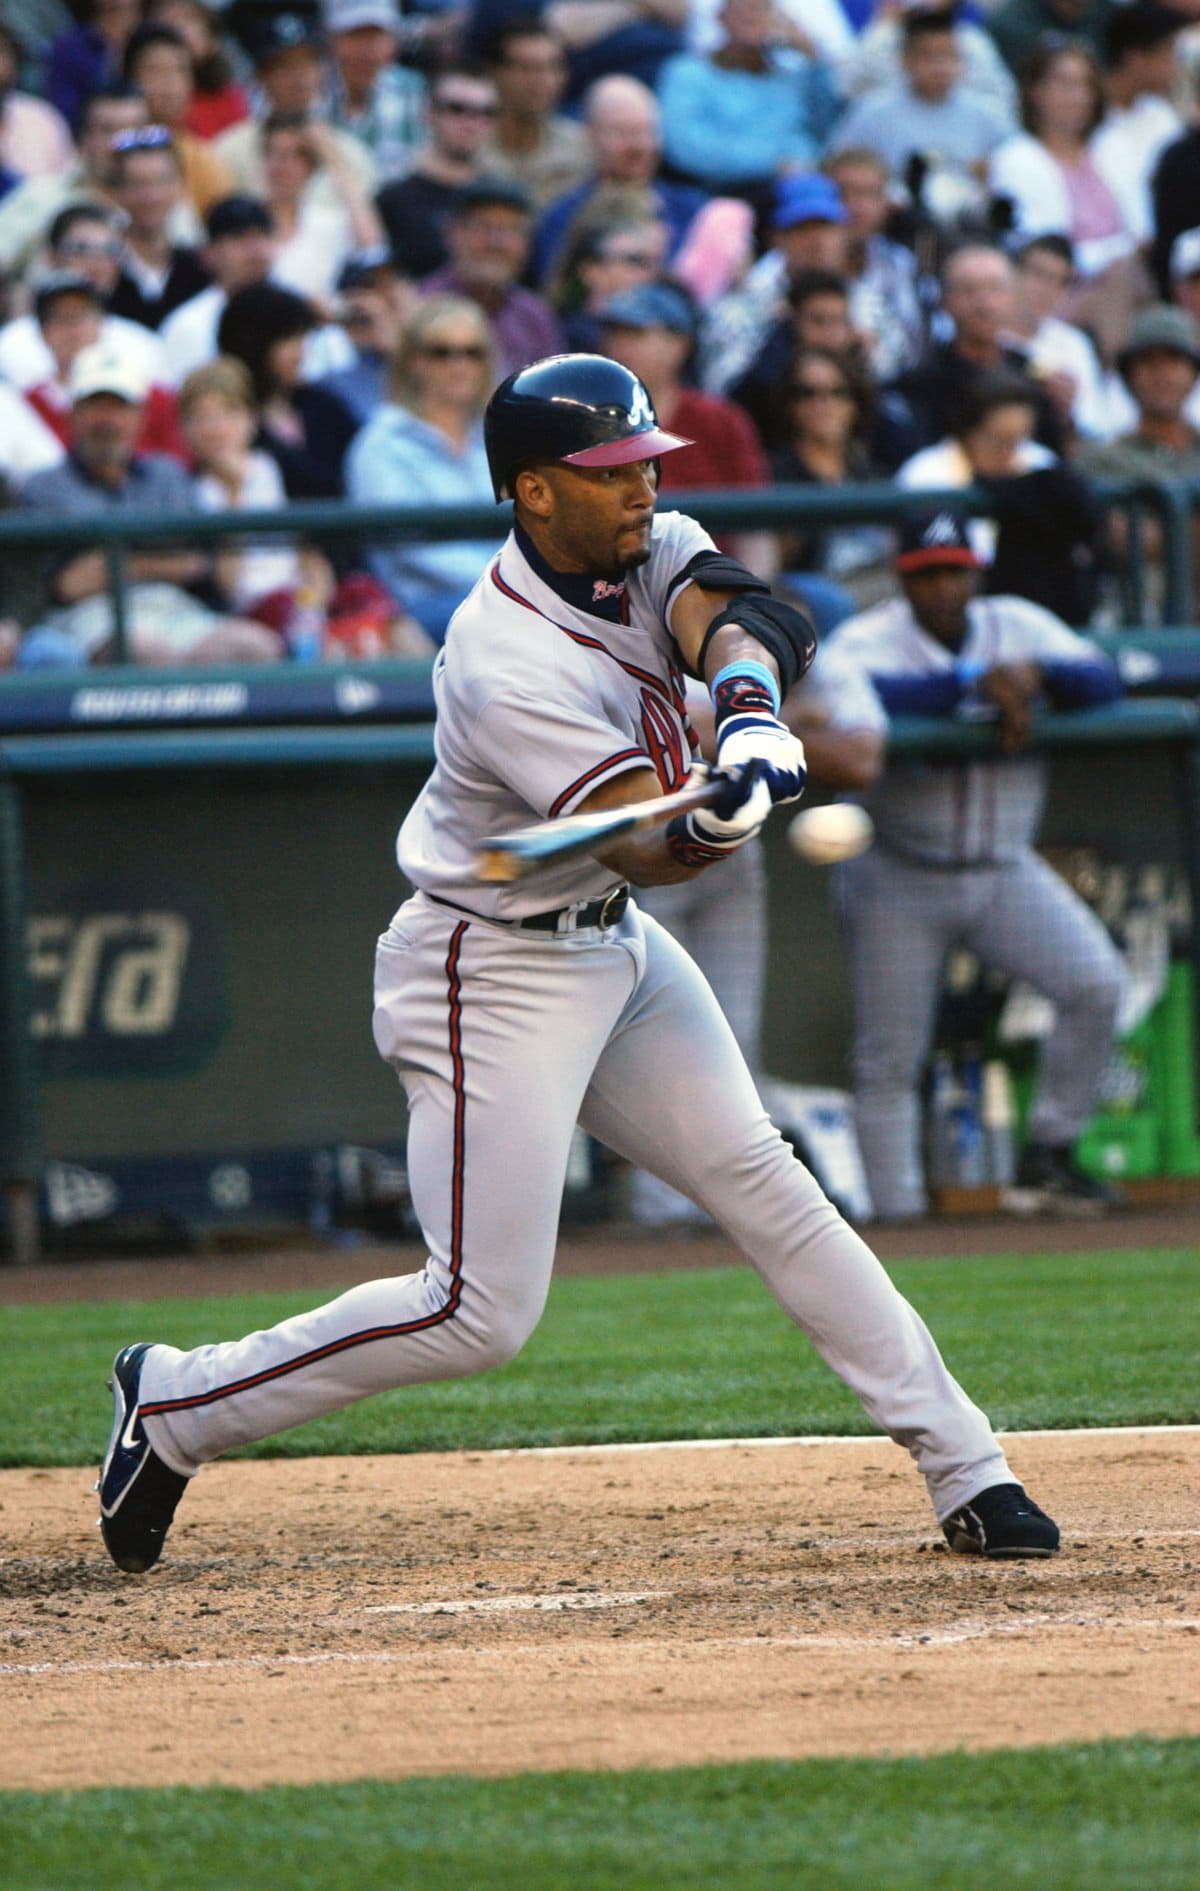 Gary Sheffield swings at the pitch